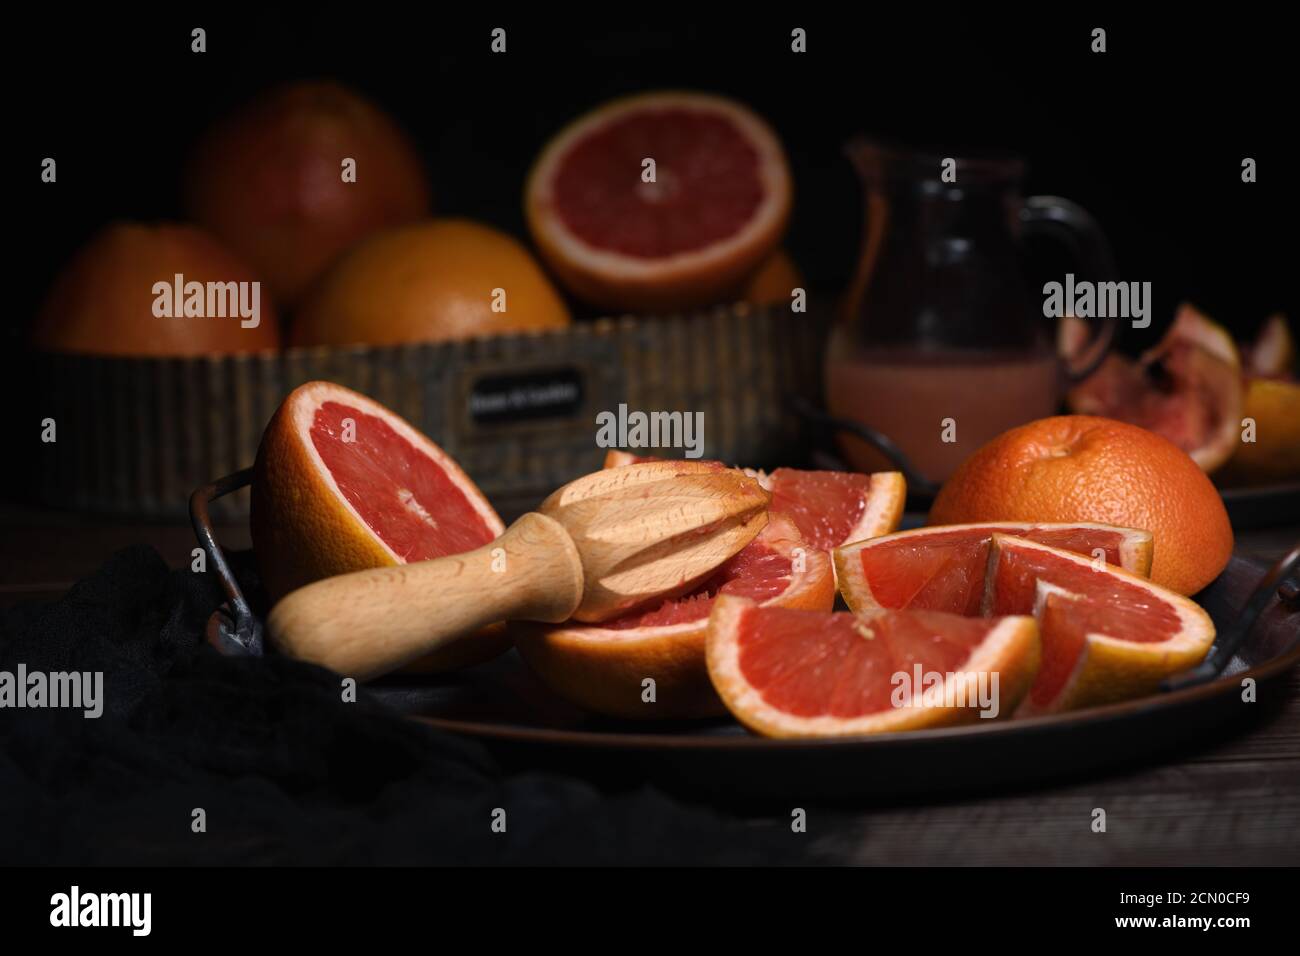 Slices of fresh grapefruit prepared for making fresh squeezed juice on a platter, dark background Stock Photo